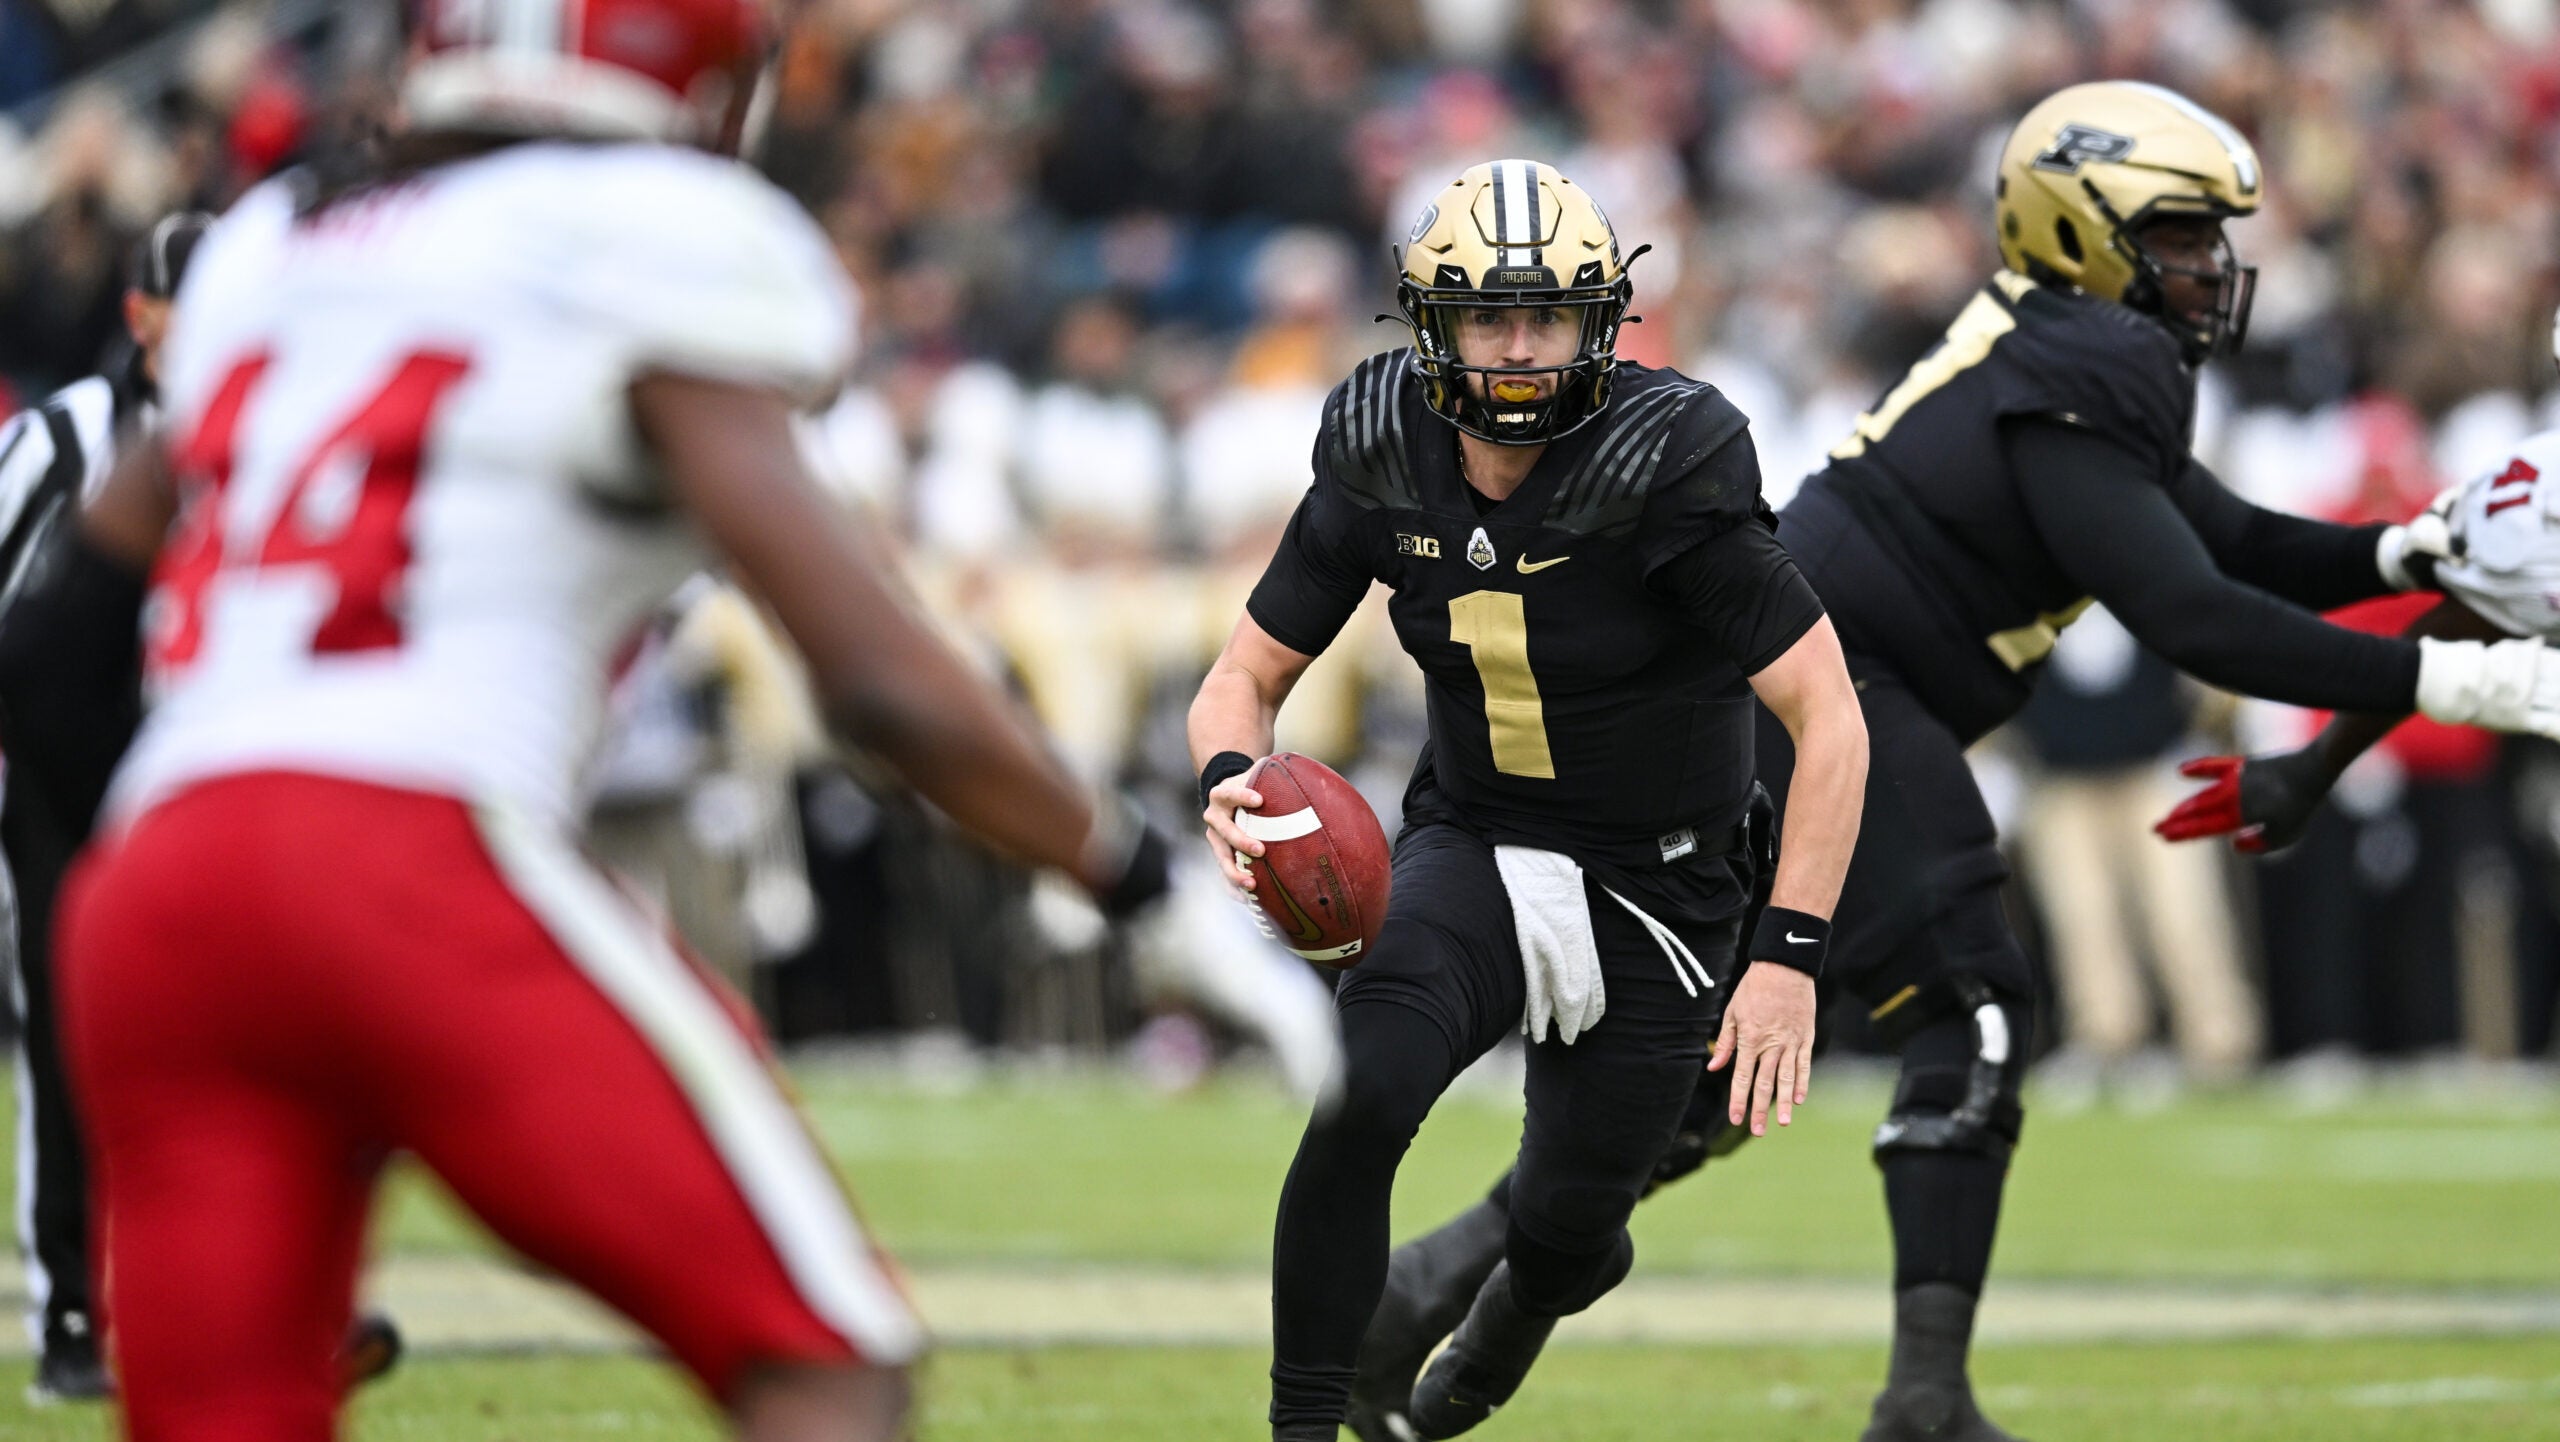 Purdue moves football season opener against Indiana State to Aug. 31